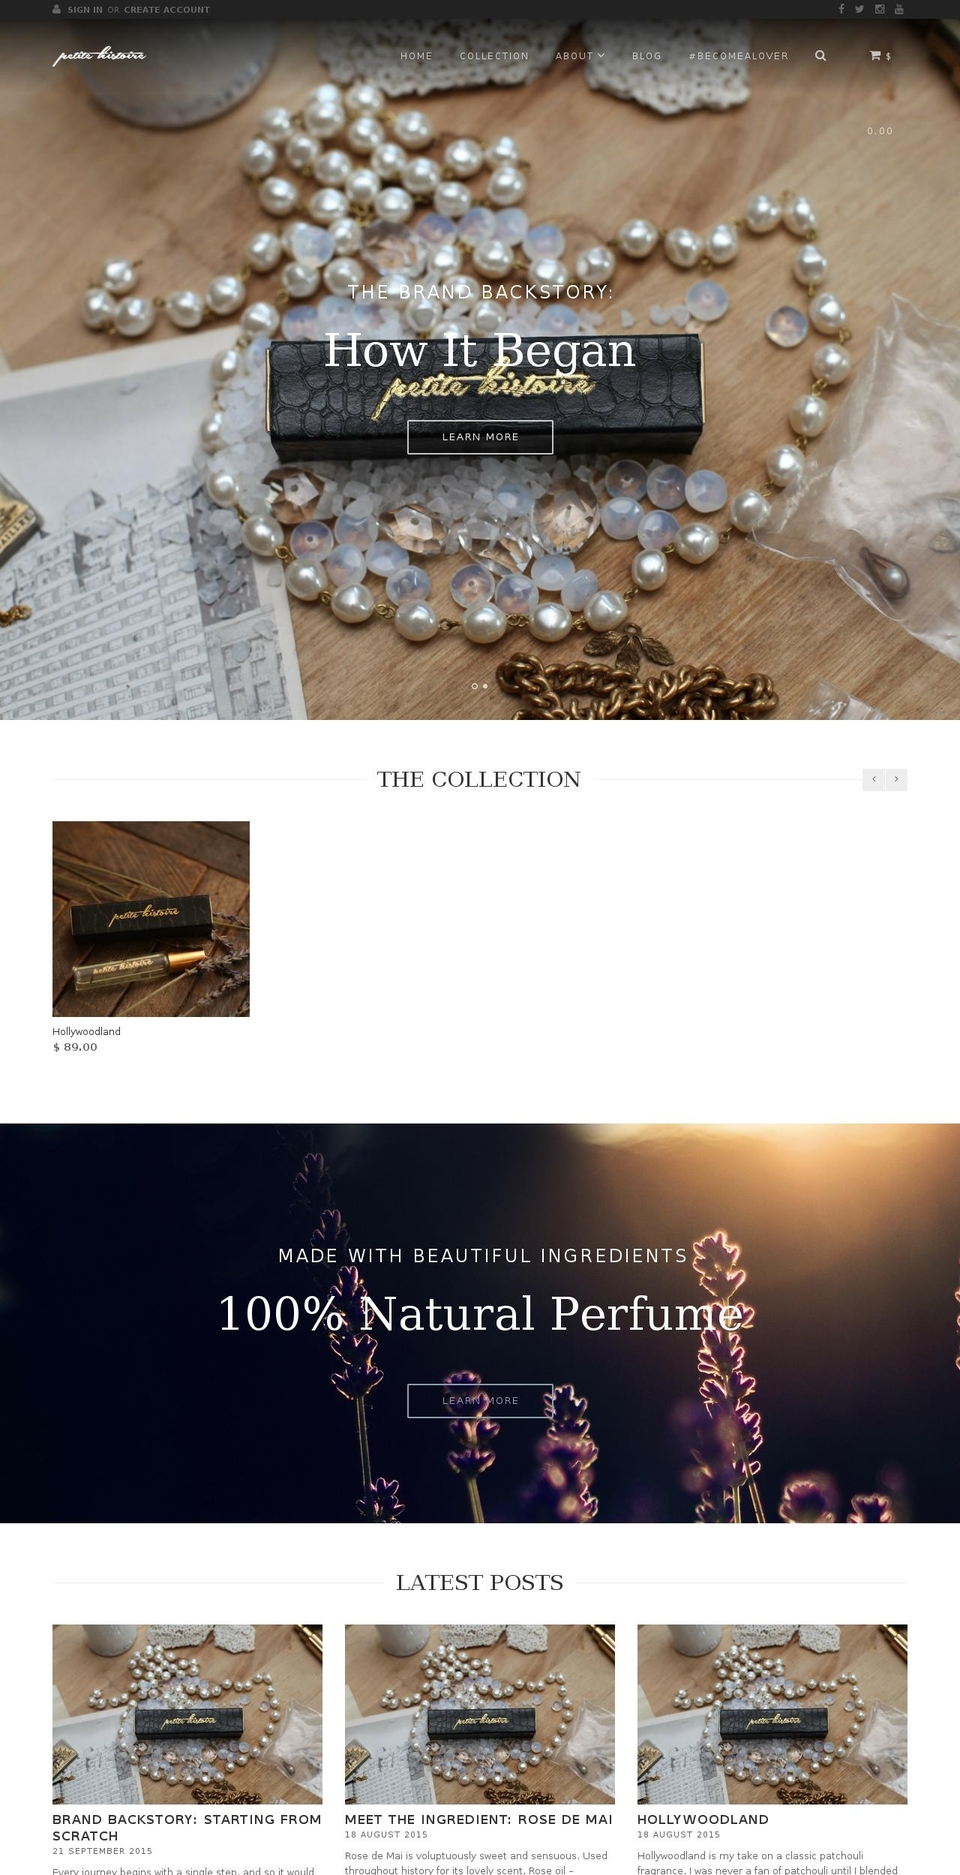 cover-theme-package Shopify theme site example petite-histoire.com